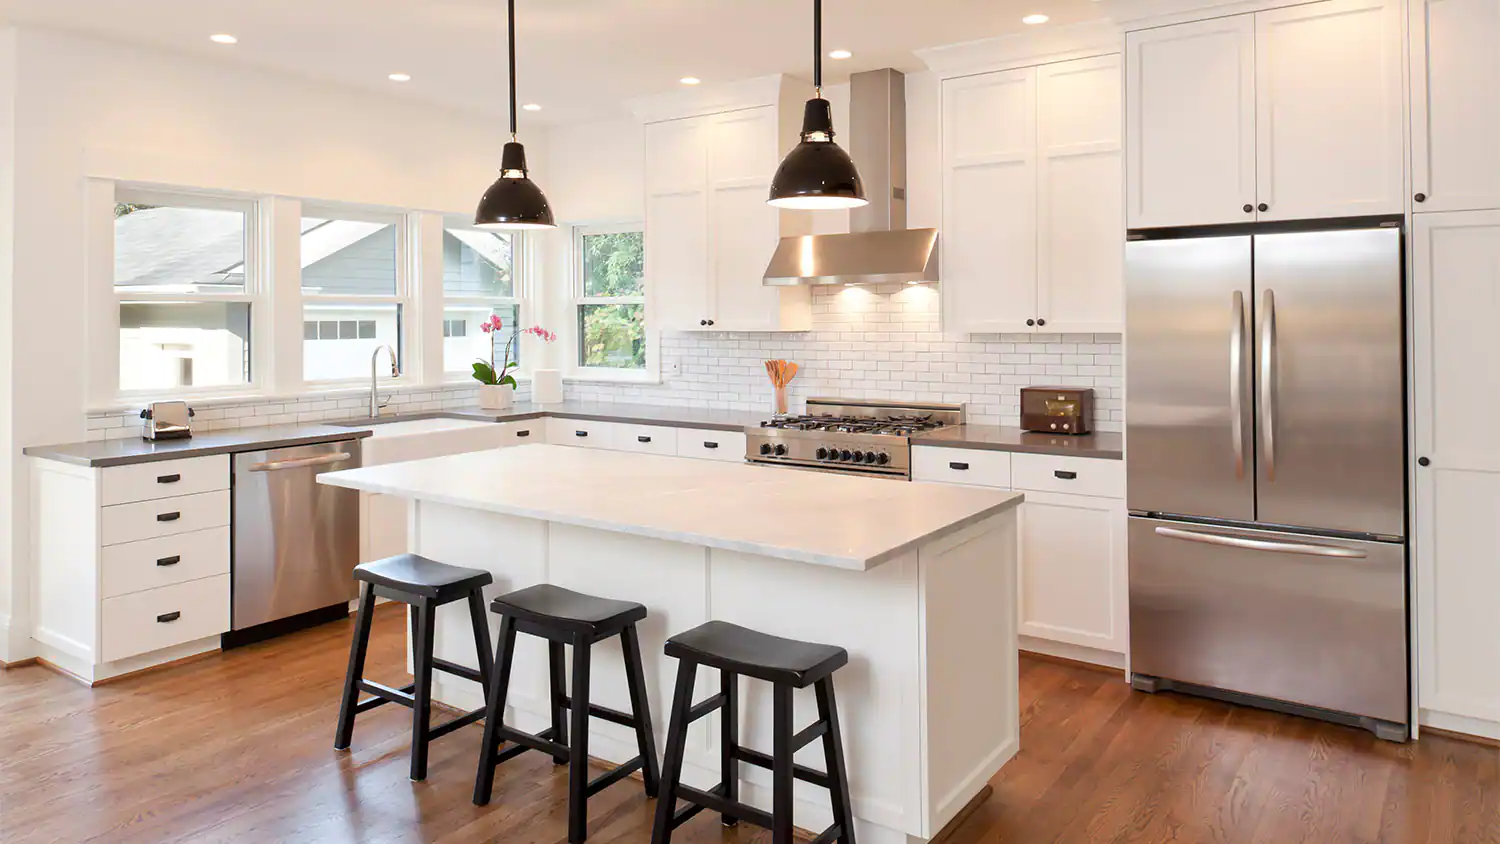 Three Important Considerations When Designing Your Kitchen Cabinets